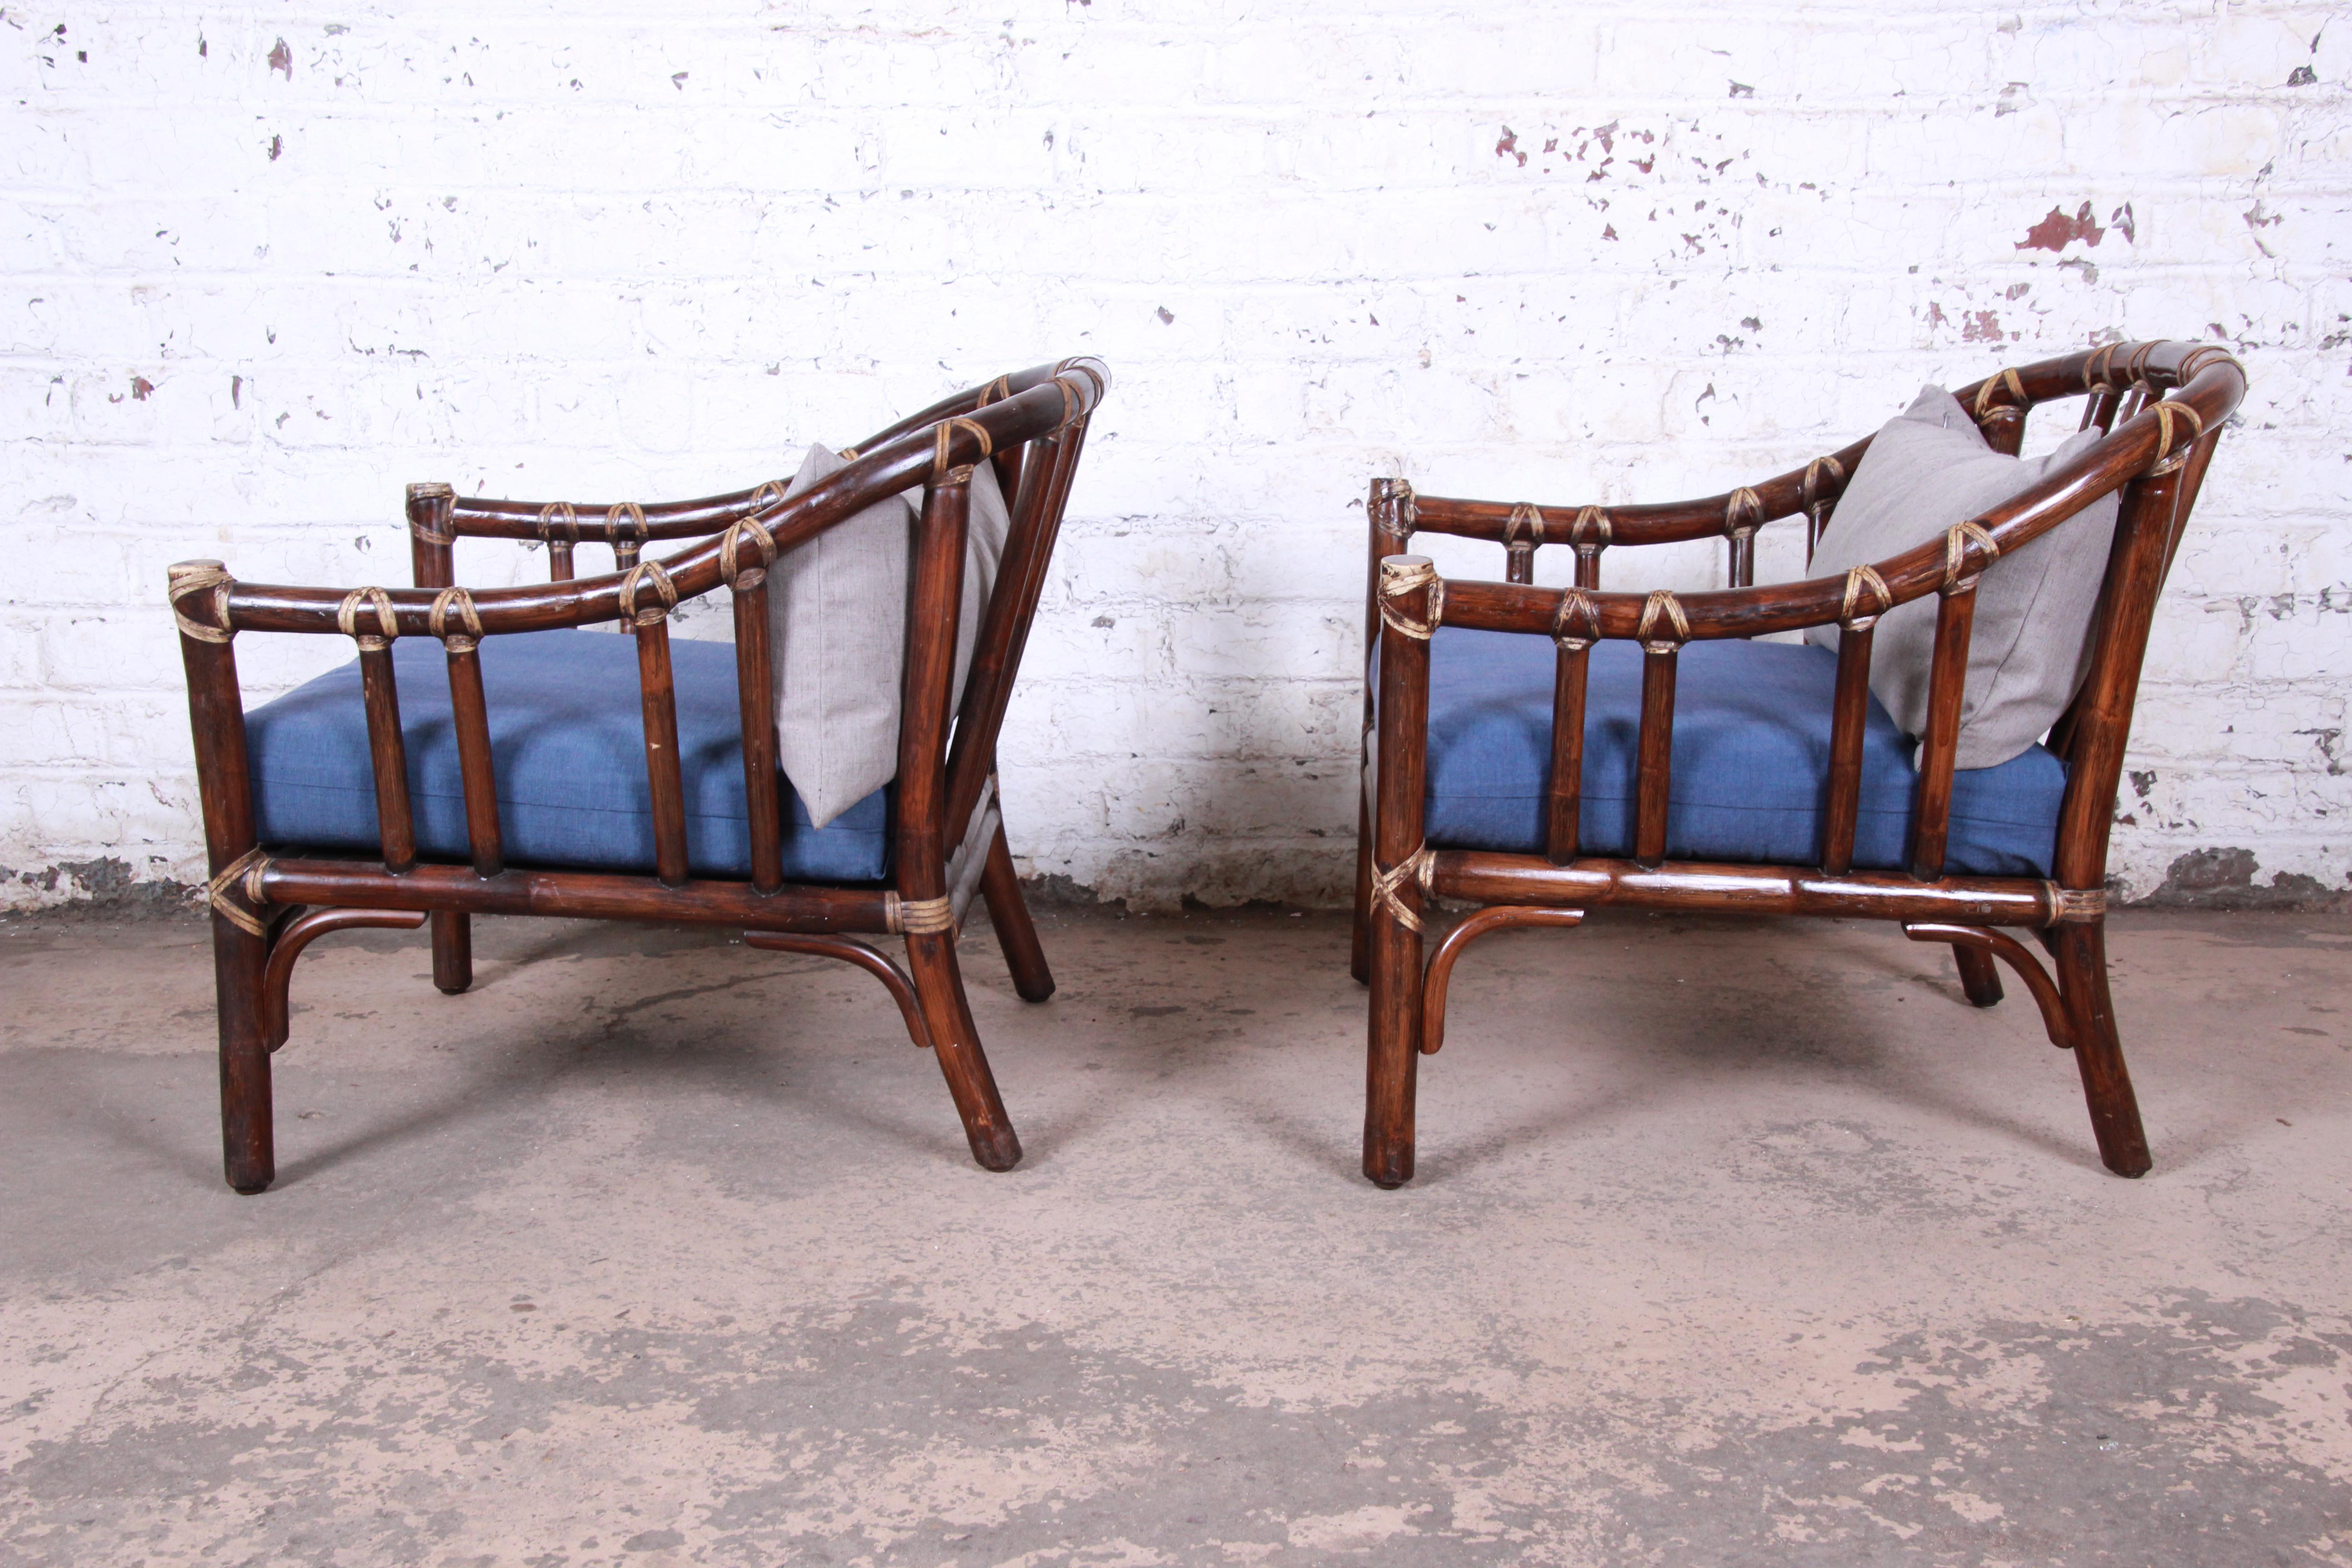 Upholstery McGuire Hollywood Regency Mid-Century Modern Bent Rattan Lounge Chairs, Pair